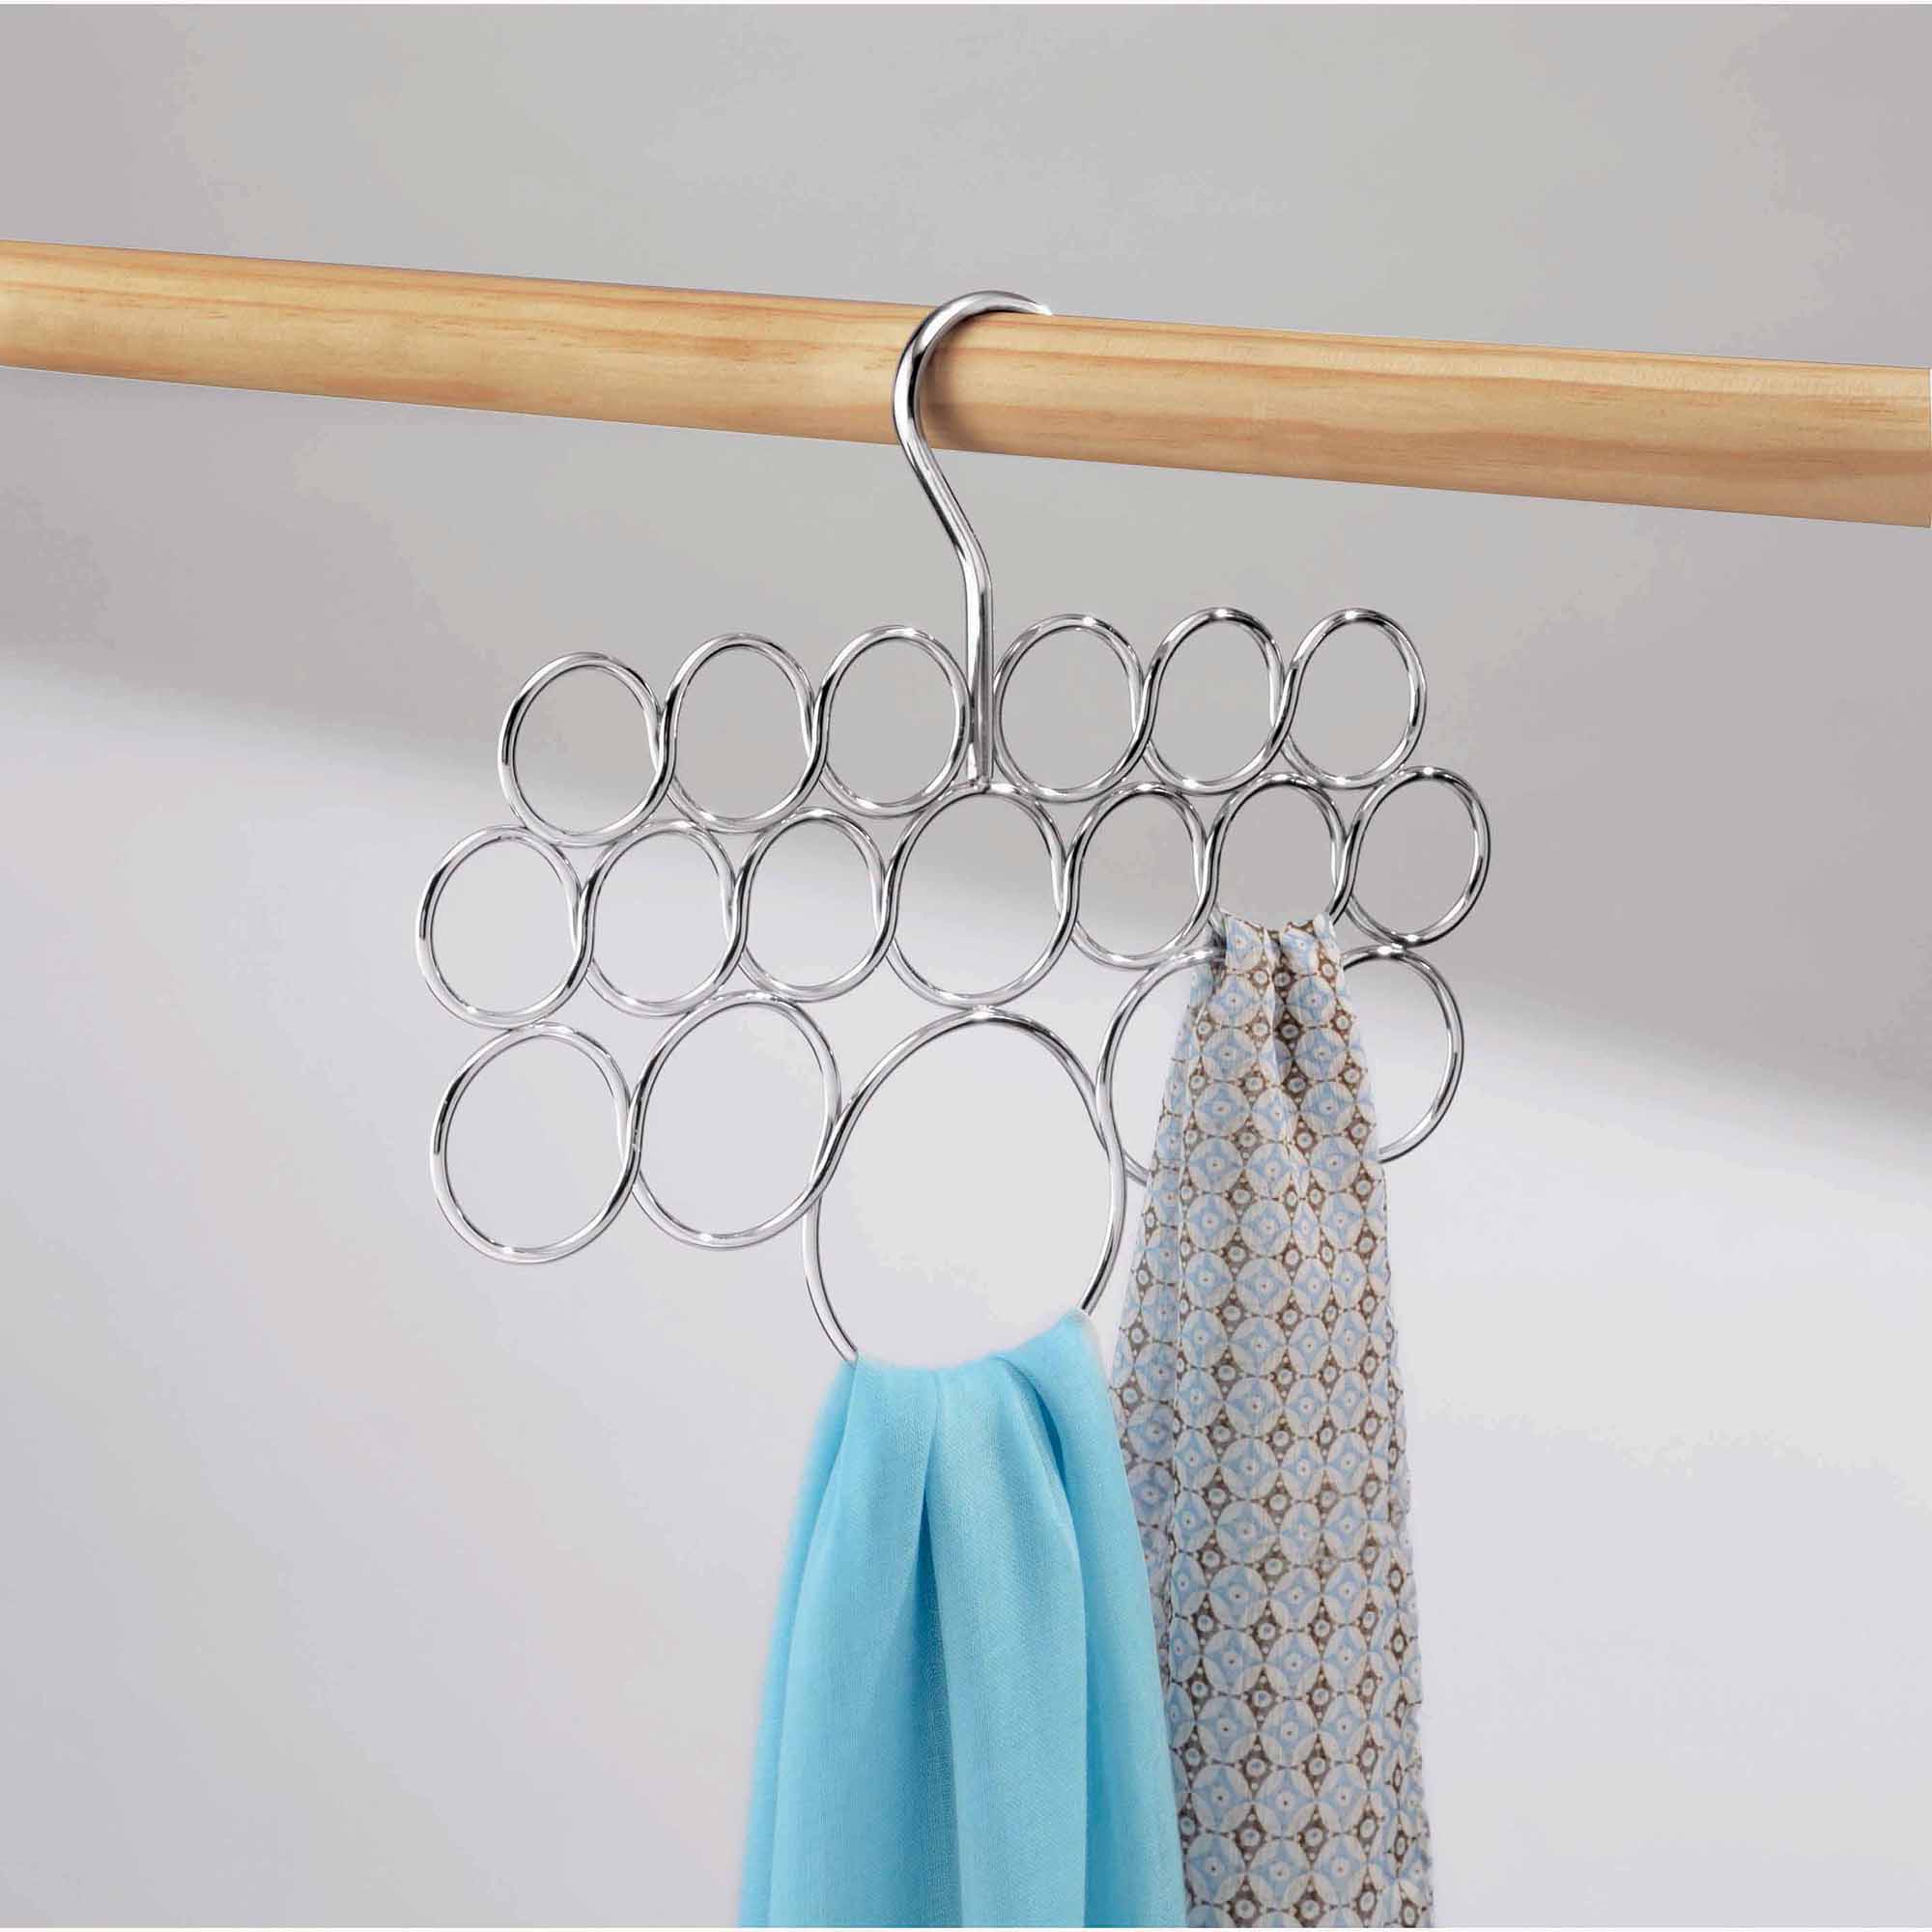 iDesign Stainless Steel Axis 18 Loop Over the Rod Scarf Hanger - image 4 of 4